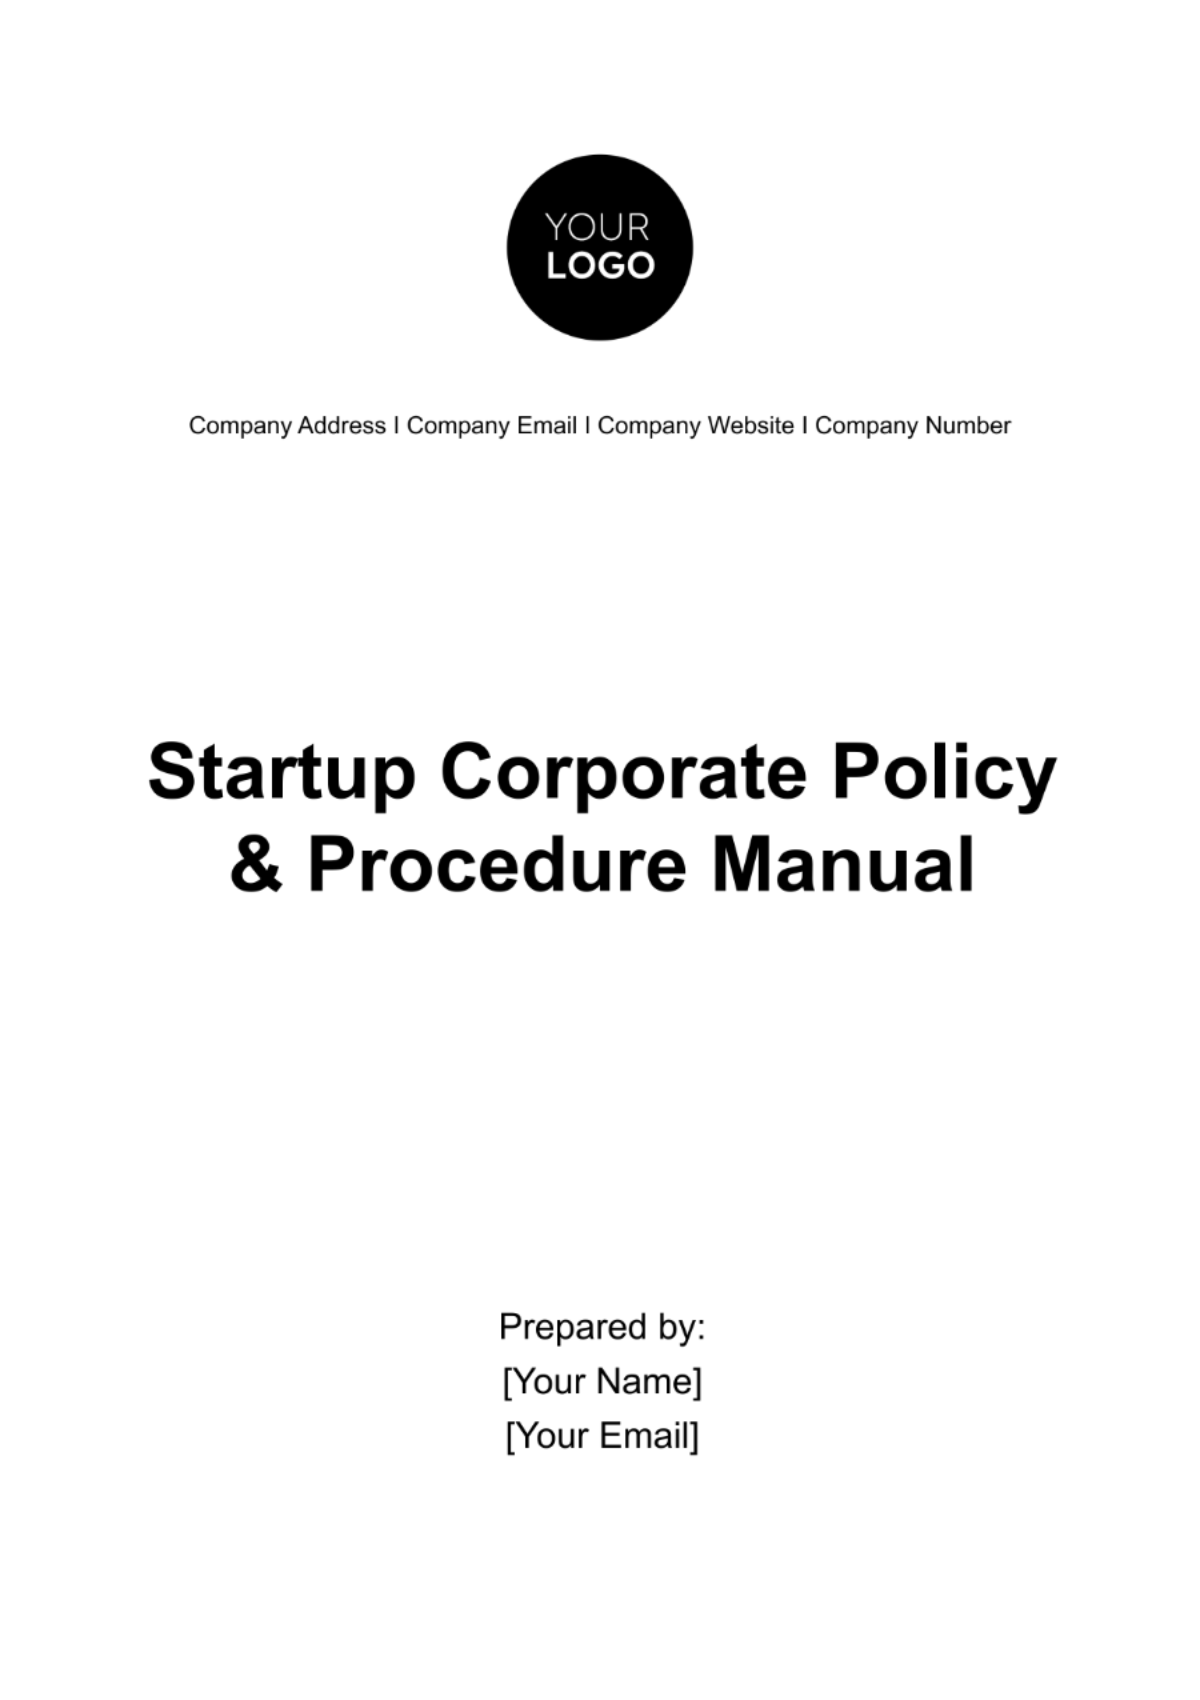 Free Startup Corporate Policy & Procedure Manual Template